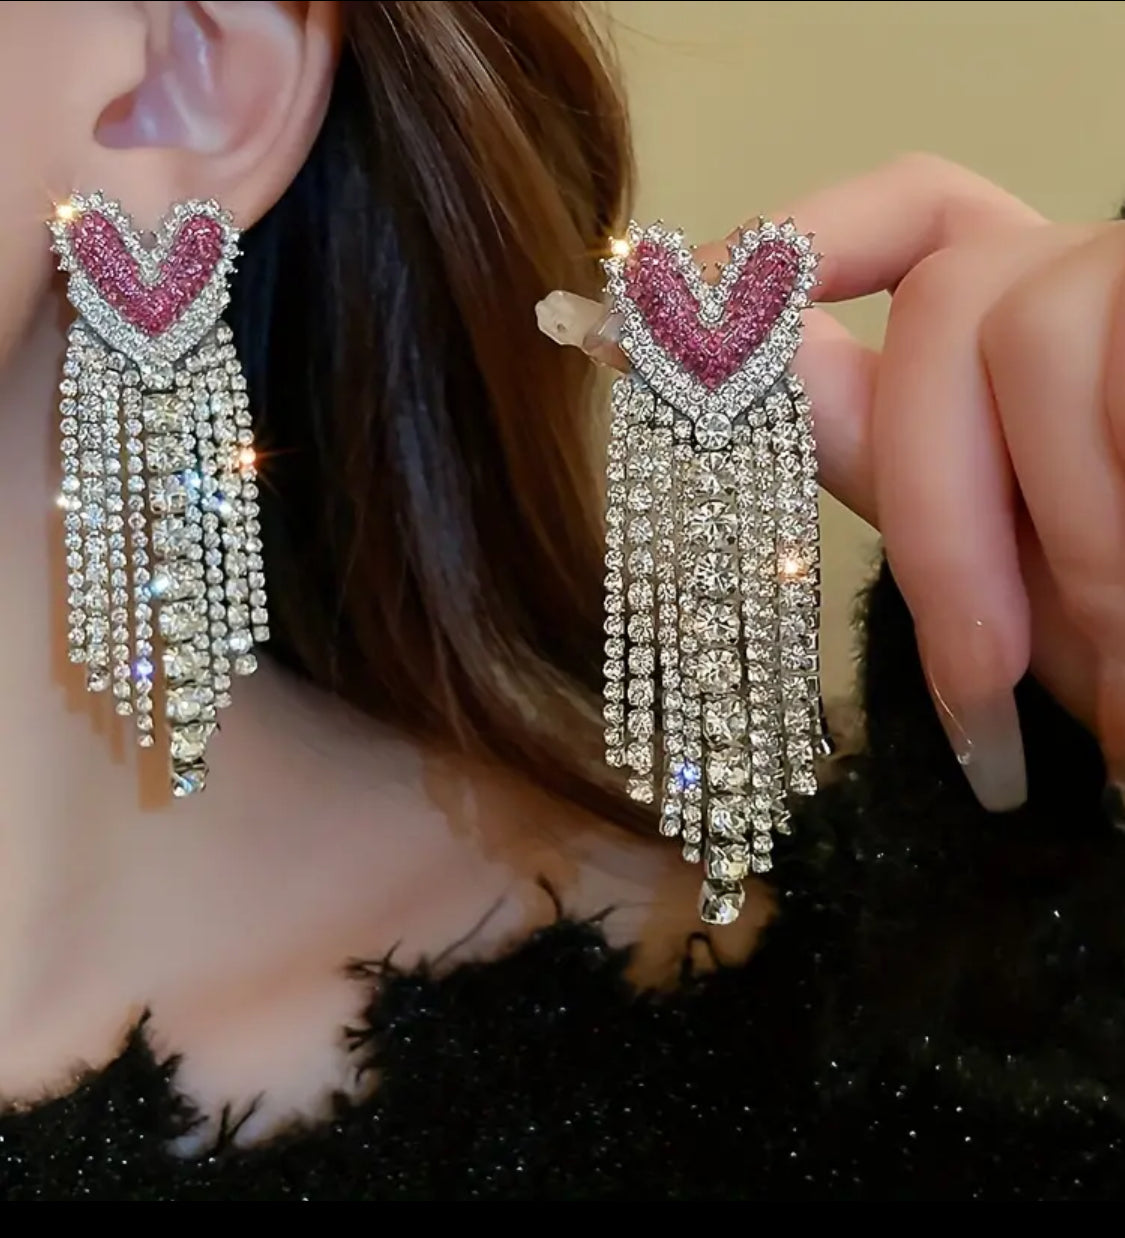 Absolutely must have dazzling, super shiny, sparkling heart earrings, embellished with pink rhinestones ￼